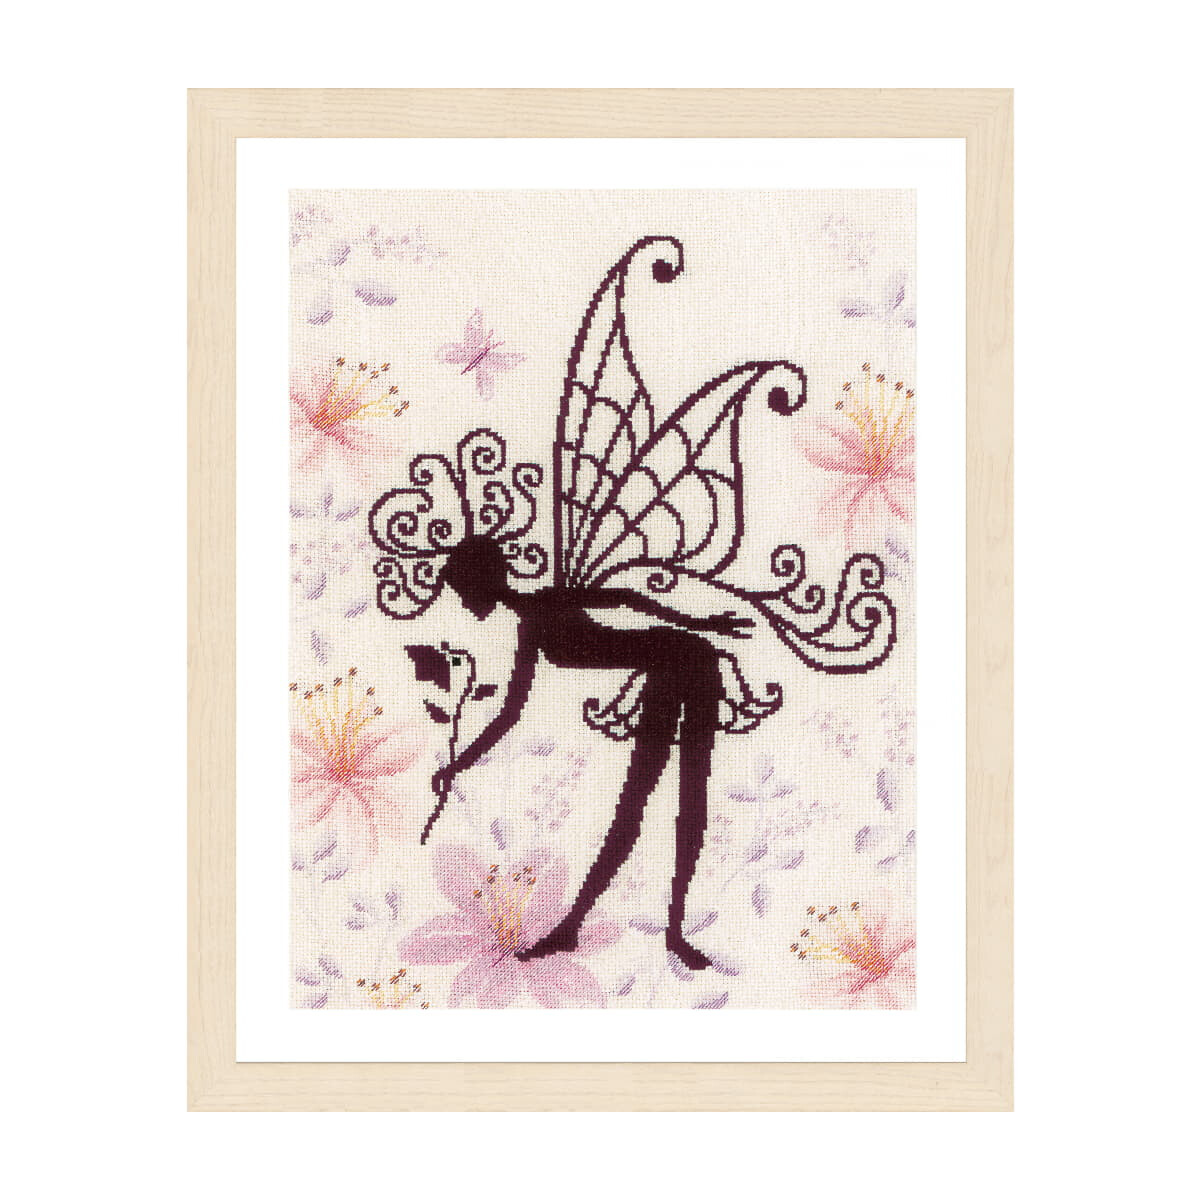 The silhouette of a fairy with curved, ornate wings bends...